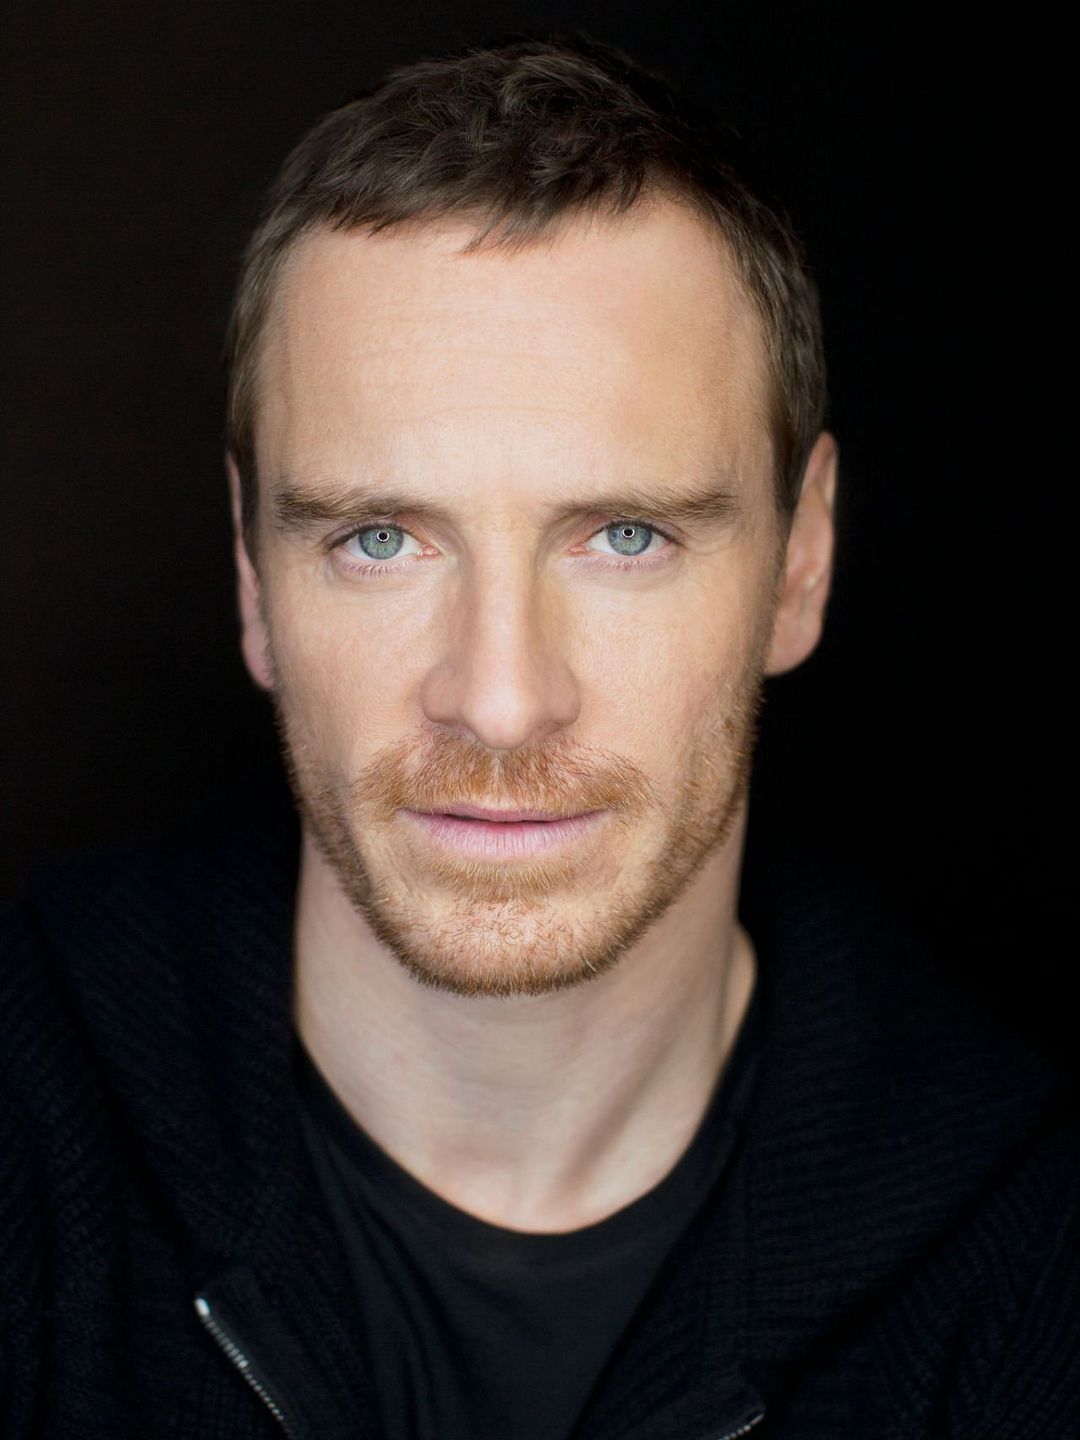 Michael Fassbender in real life